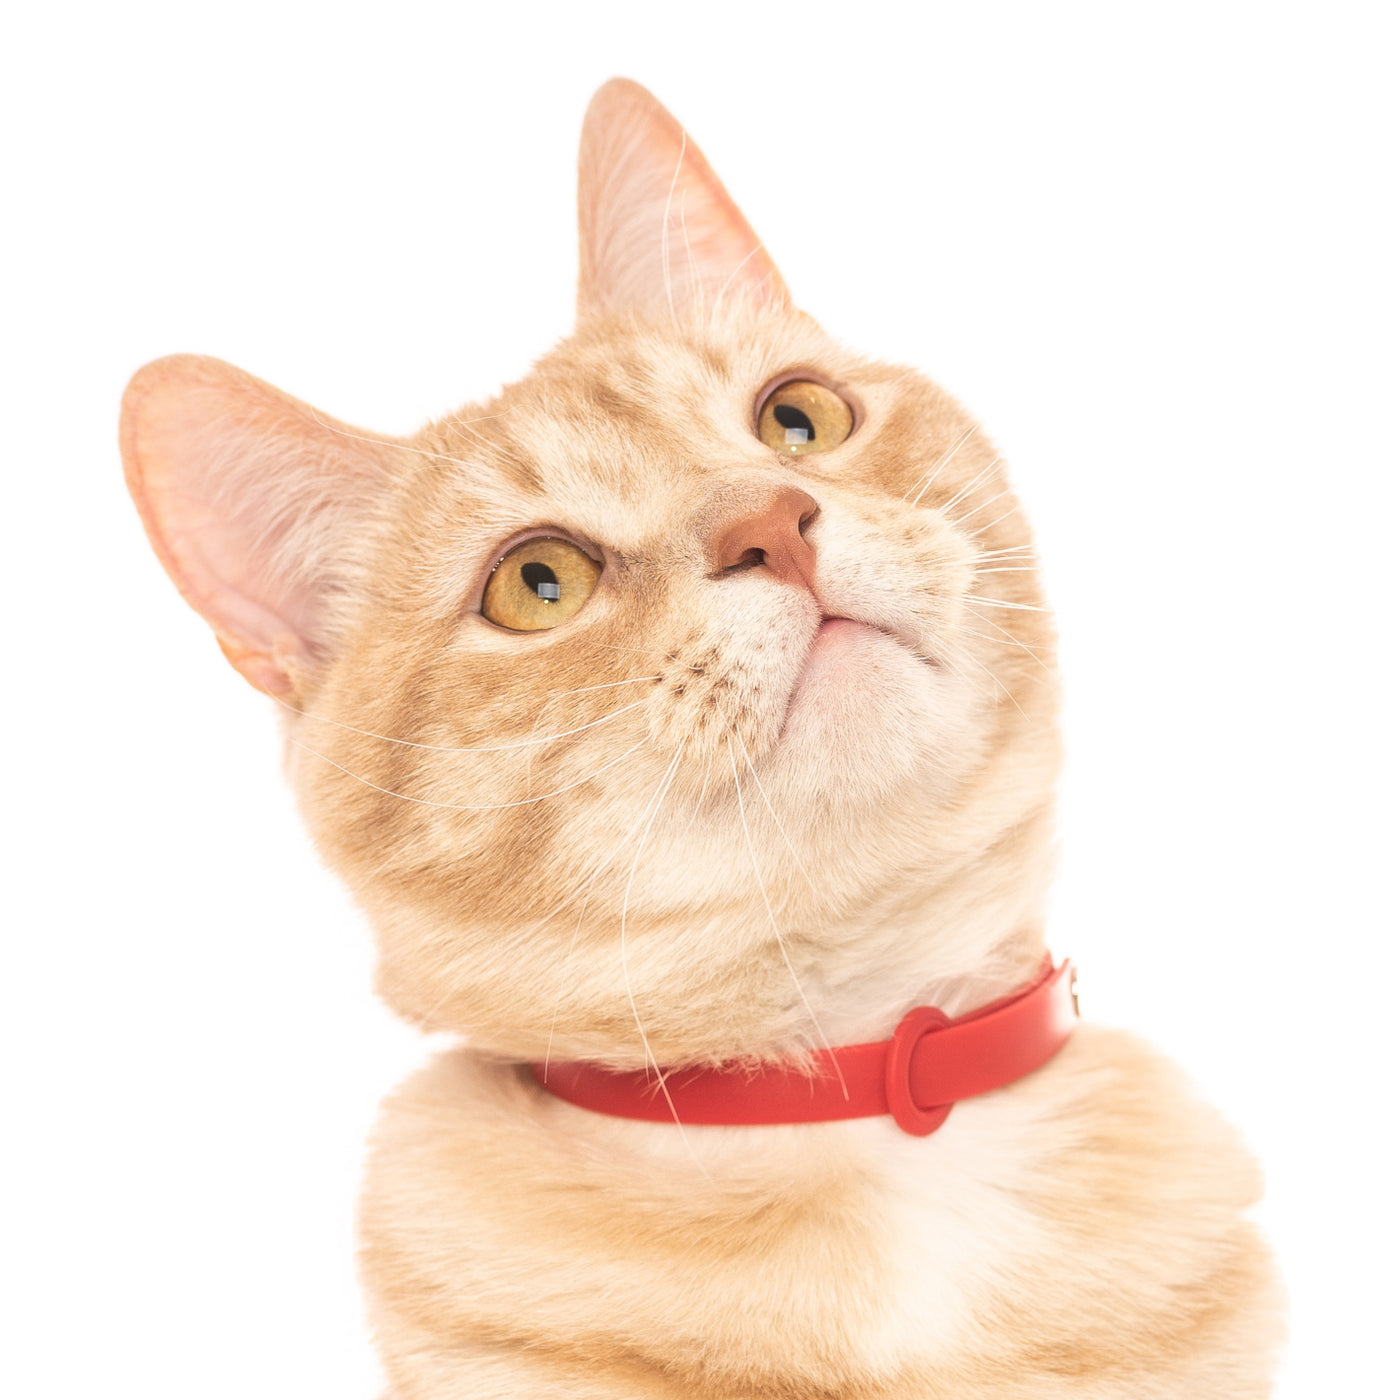 Tabby cat wearing a red collar